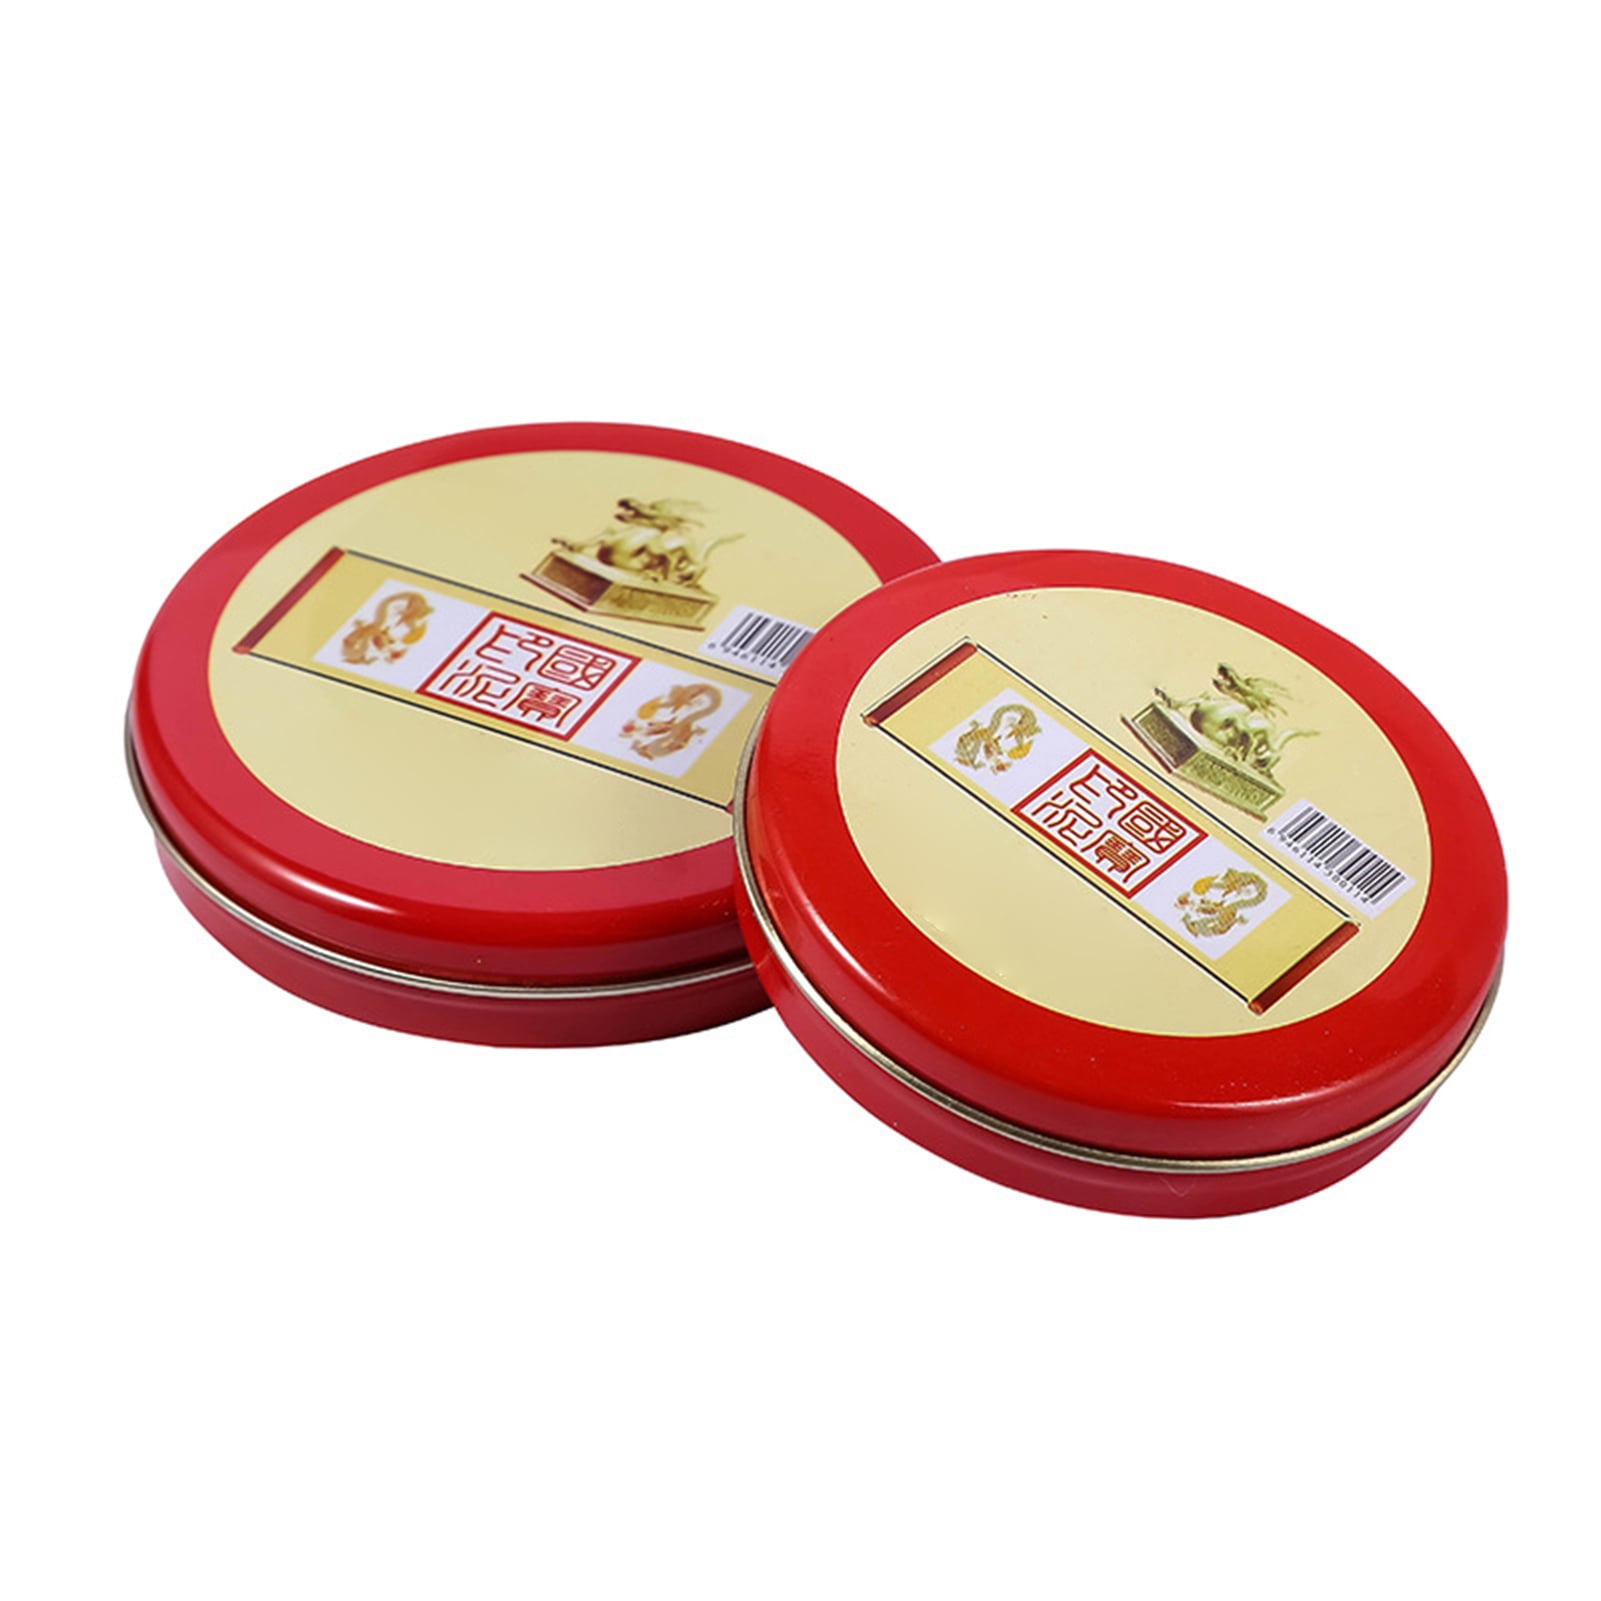 Operitacx 1pc Box Ink Pad Pigment Stamping Red Stamp Paste Desktop  Porcelain Adornment Inkpad for Stamp Chinese Calligraphy Accessories Old  Fashioned